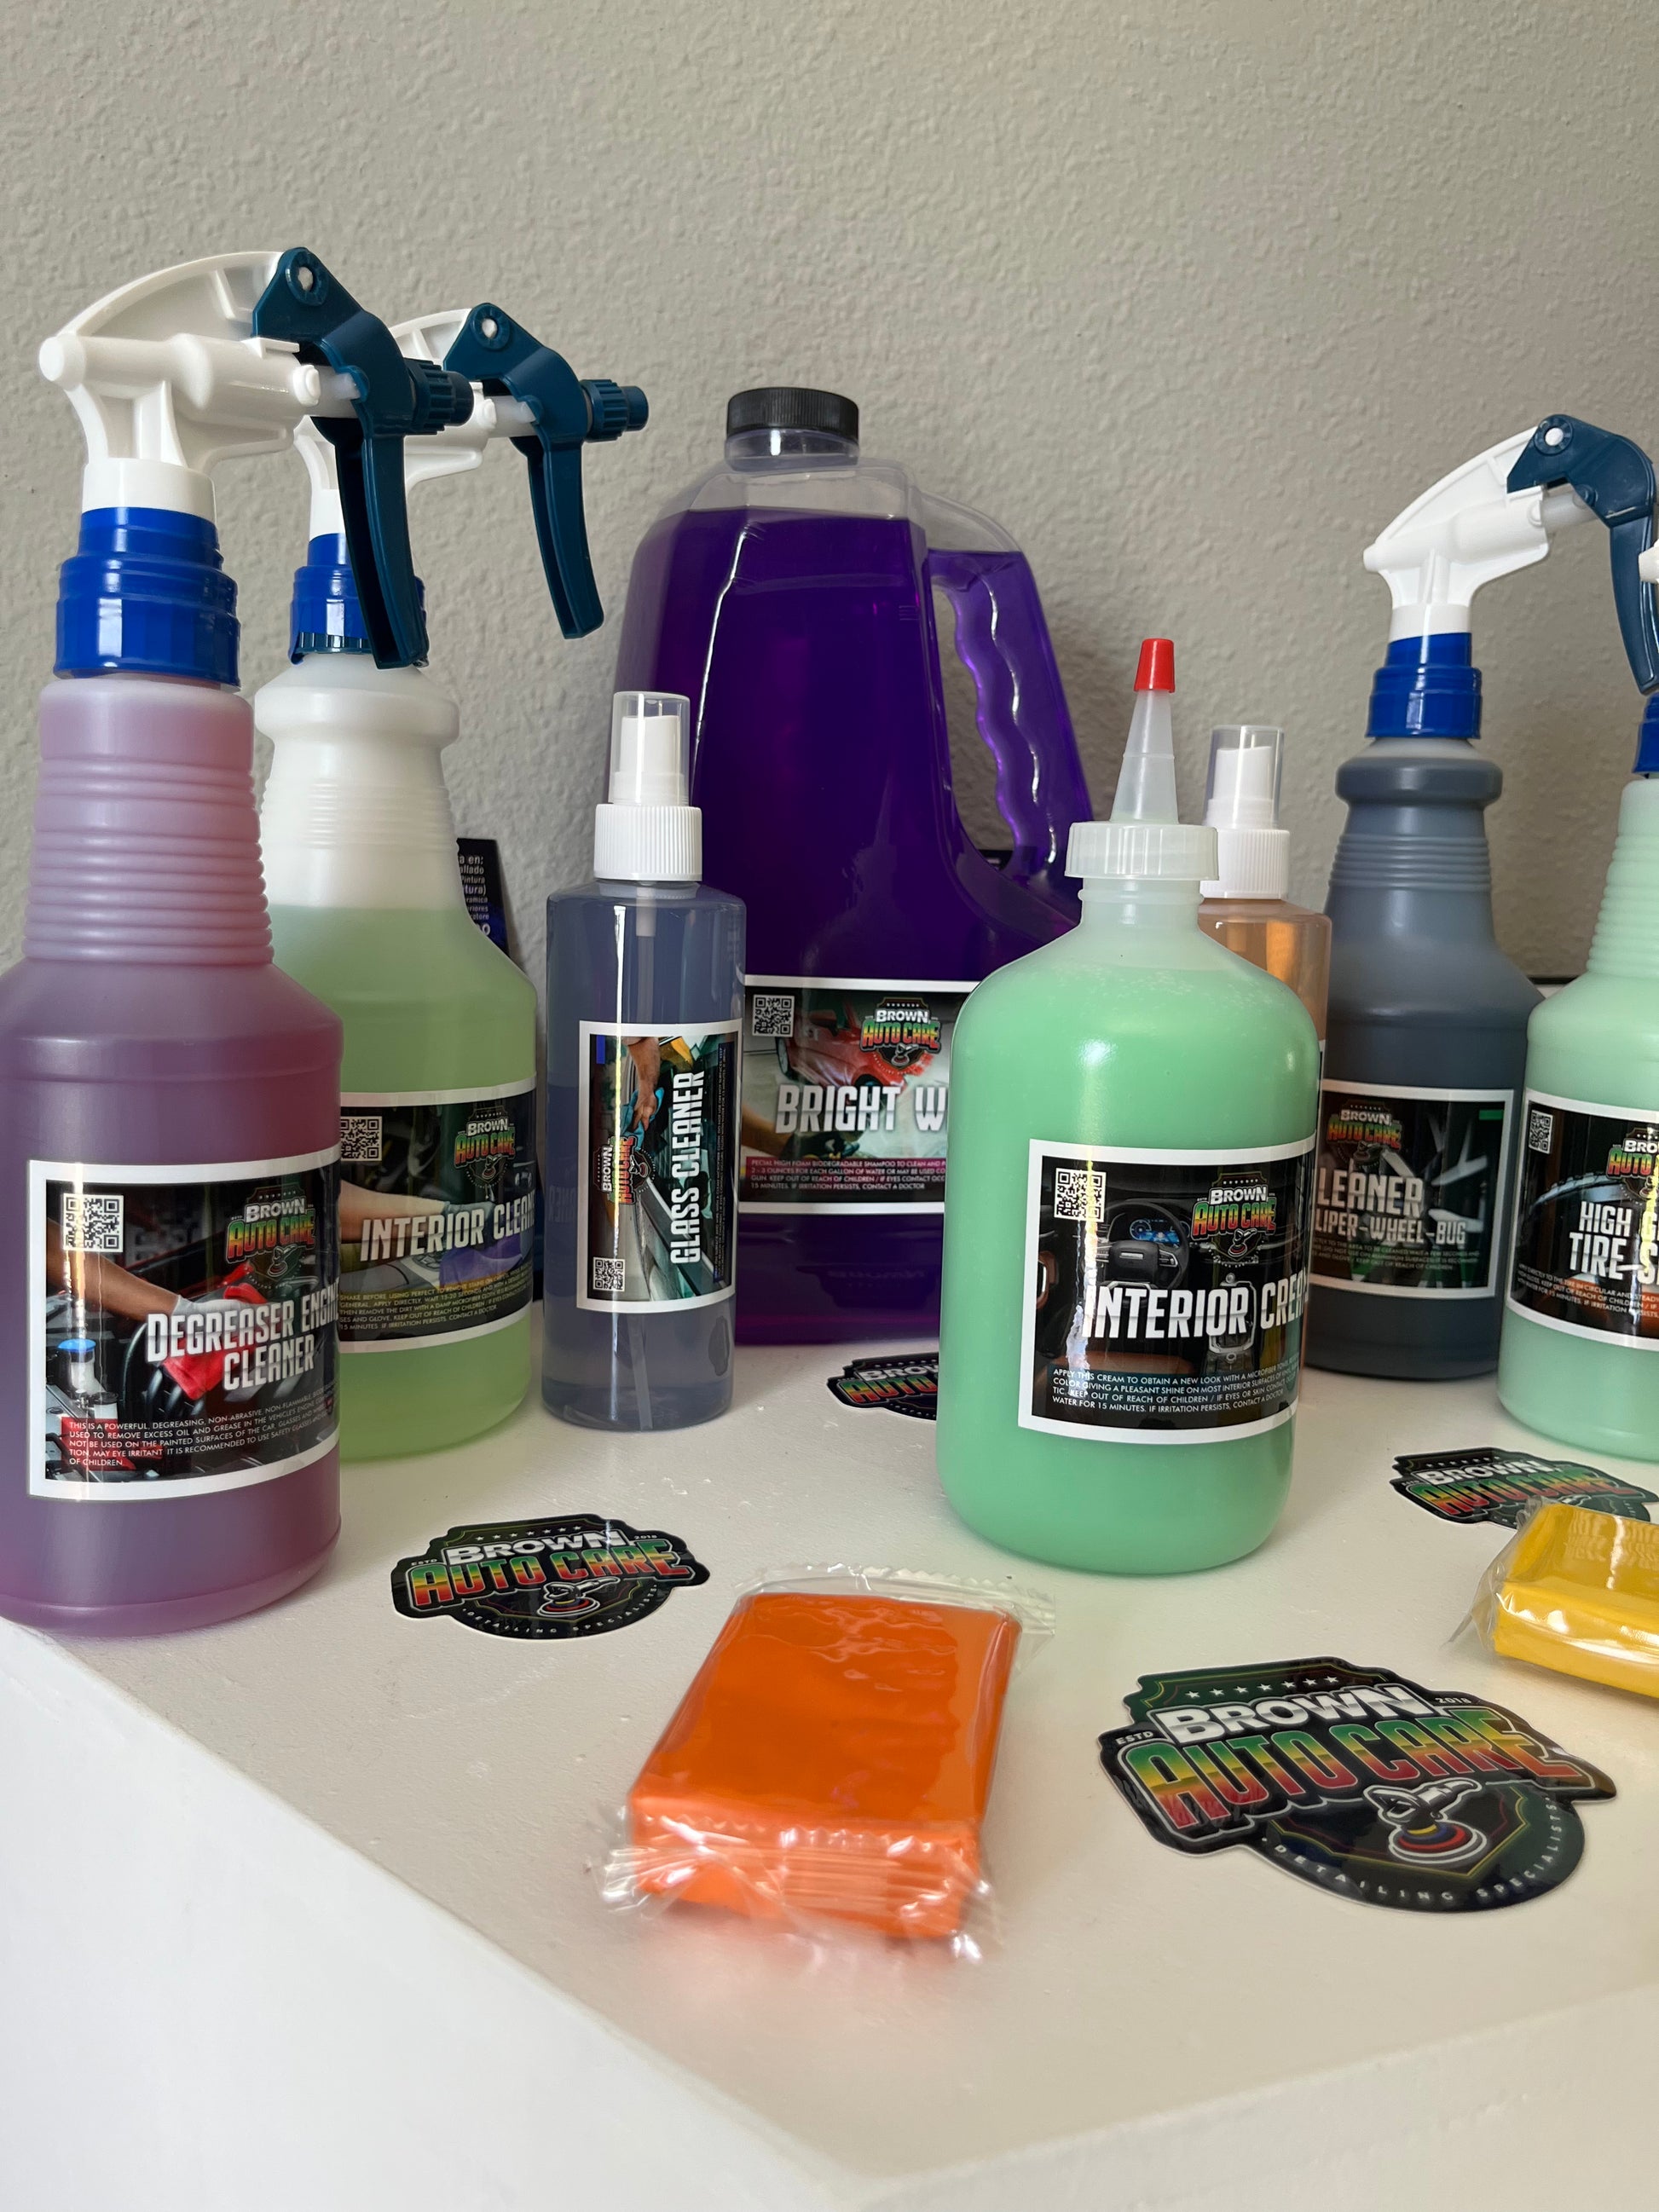 KIT DETAILING BUCKET BROWN AUTO CARE – Brown Auto Care Detailing